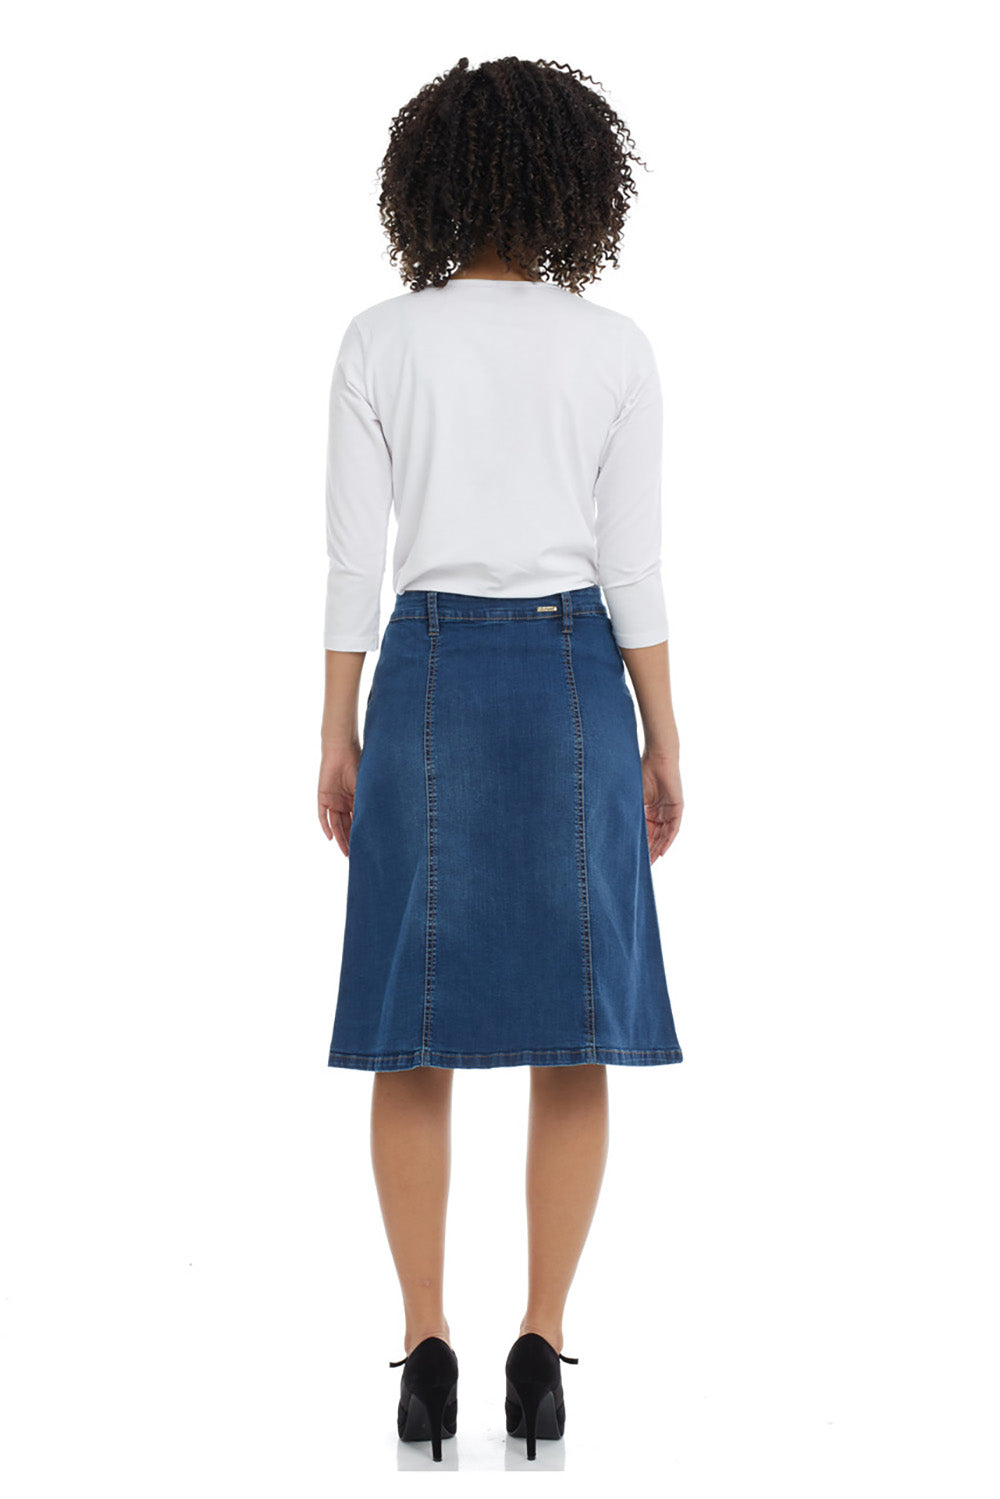 blue jean skirt with silver colored buttons 